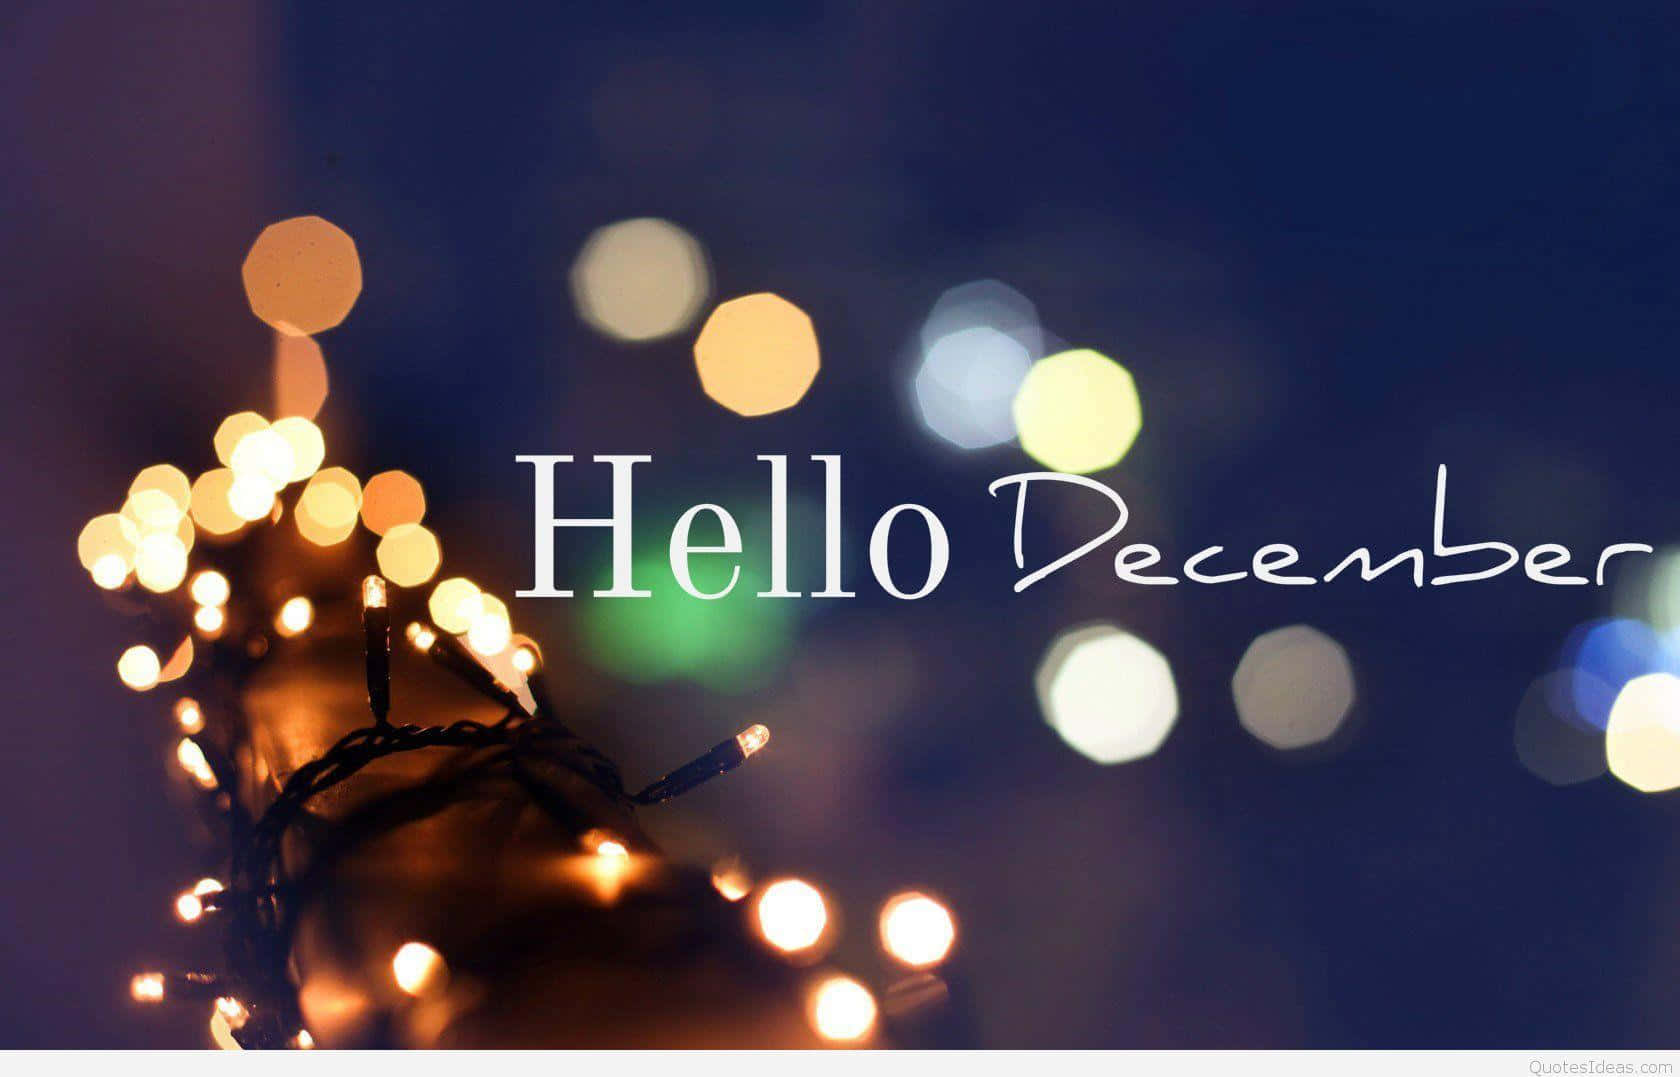 Welcome the winter season with this peaceful December background